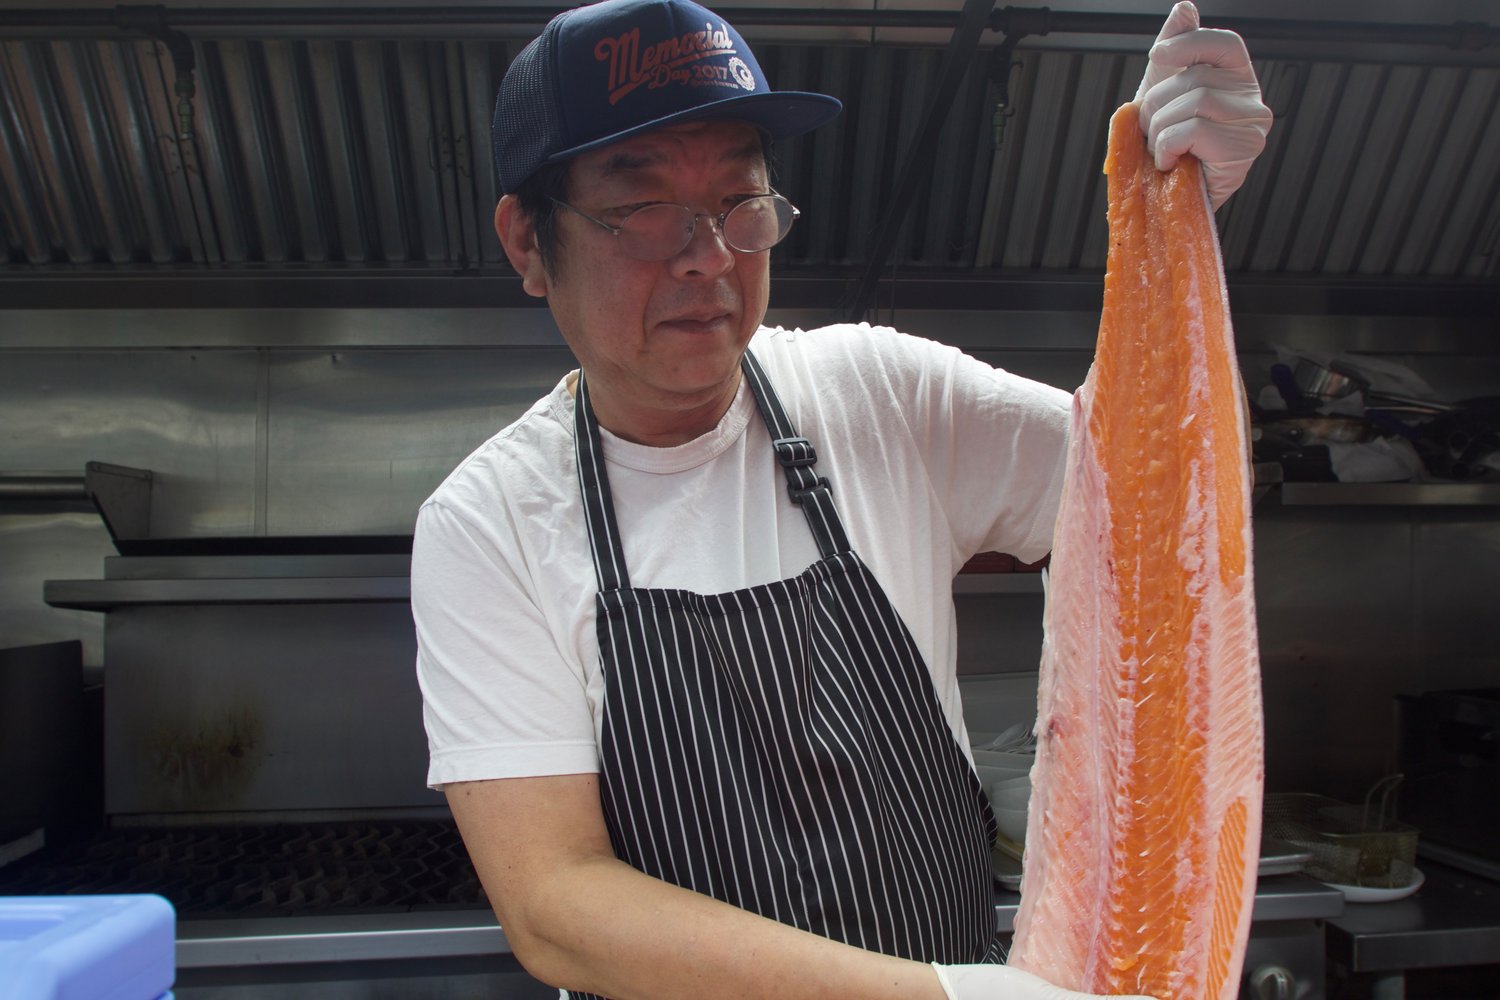 Ide cutting into a three-foot salmon with a Japanese-style chef’s knife made specifically for taking the spine off a fish.